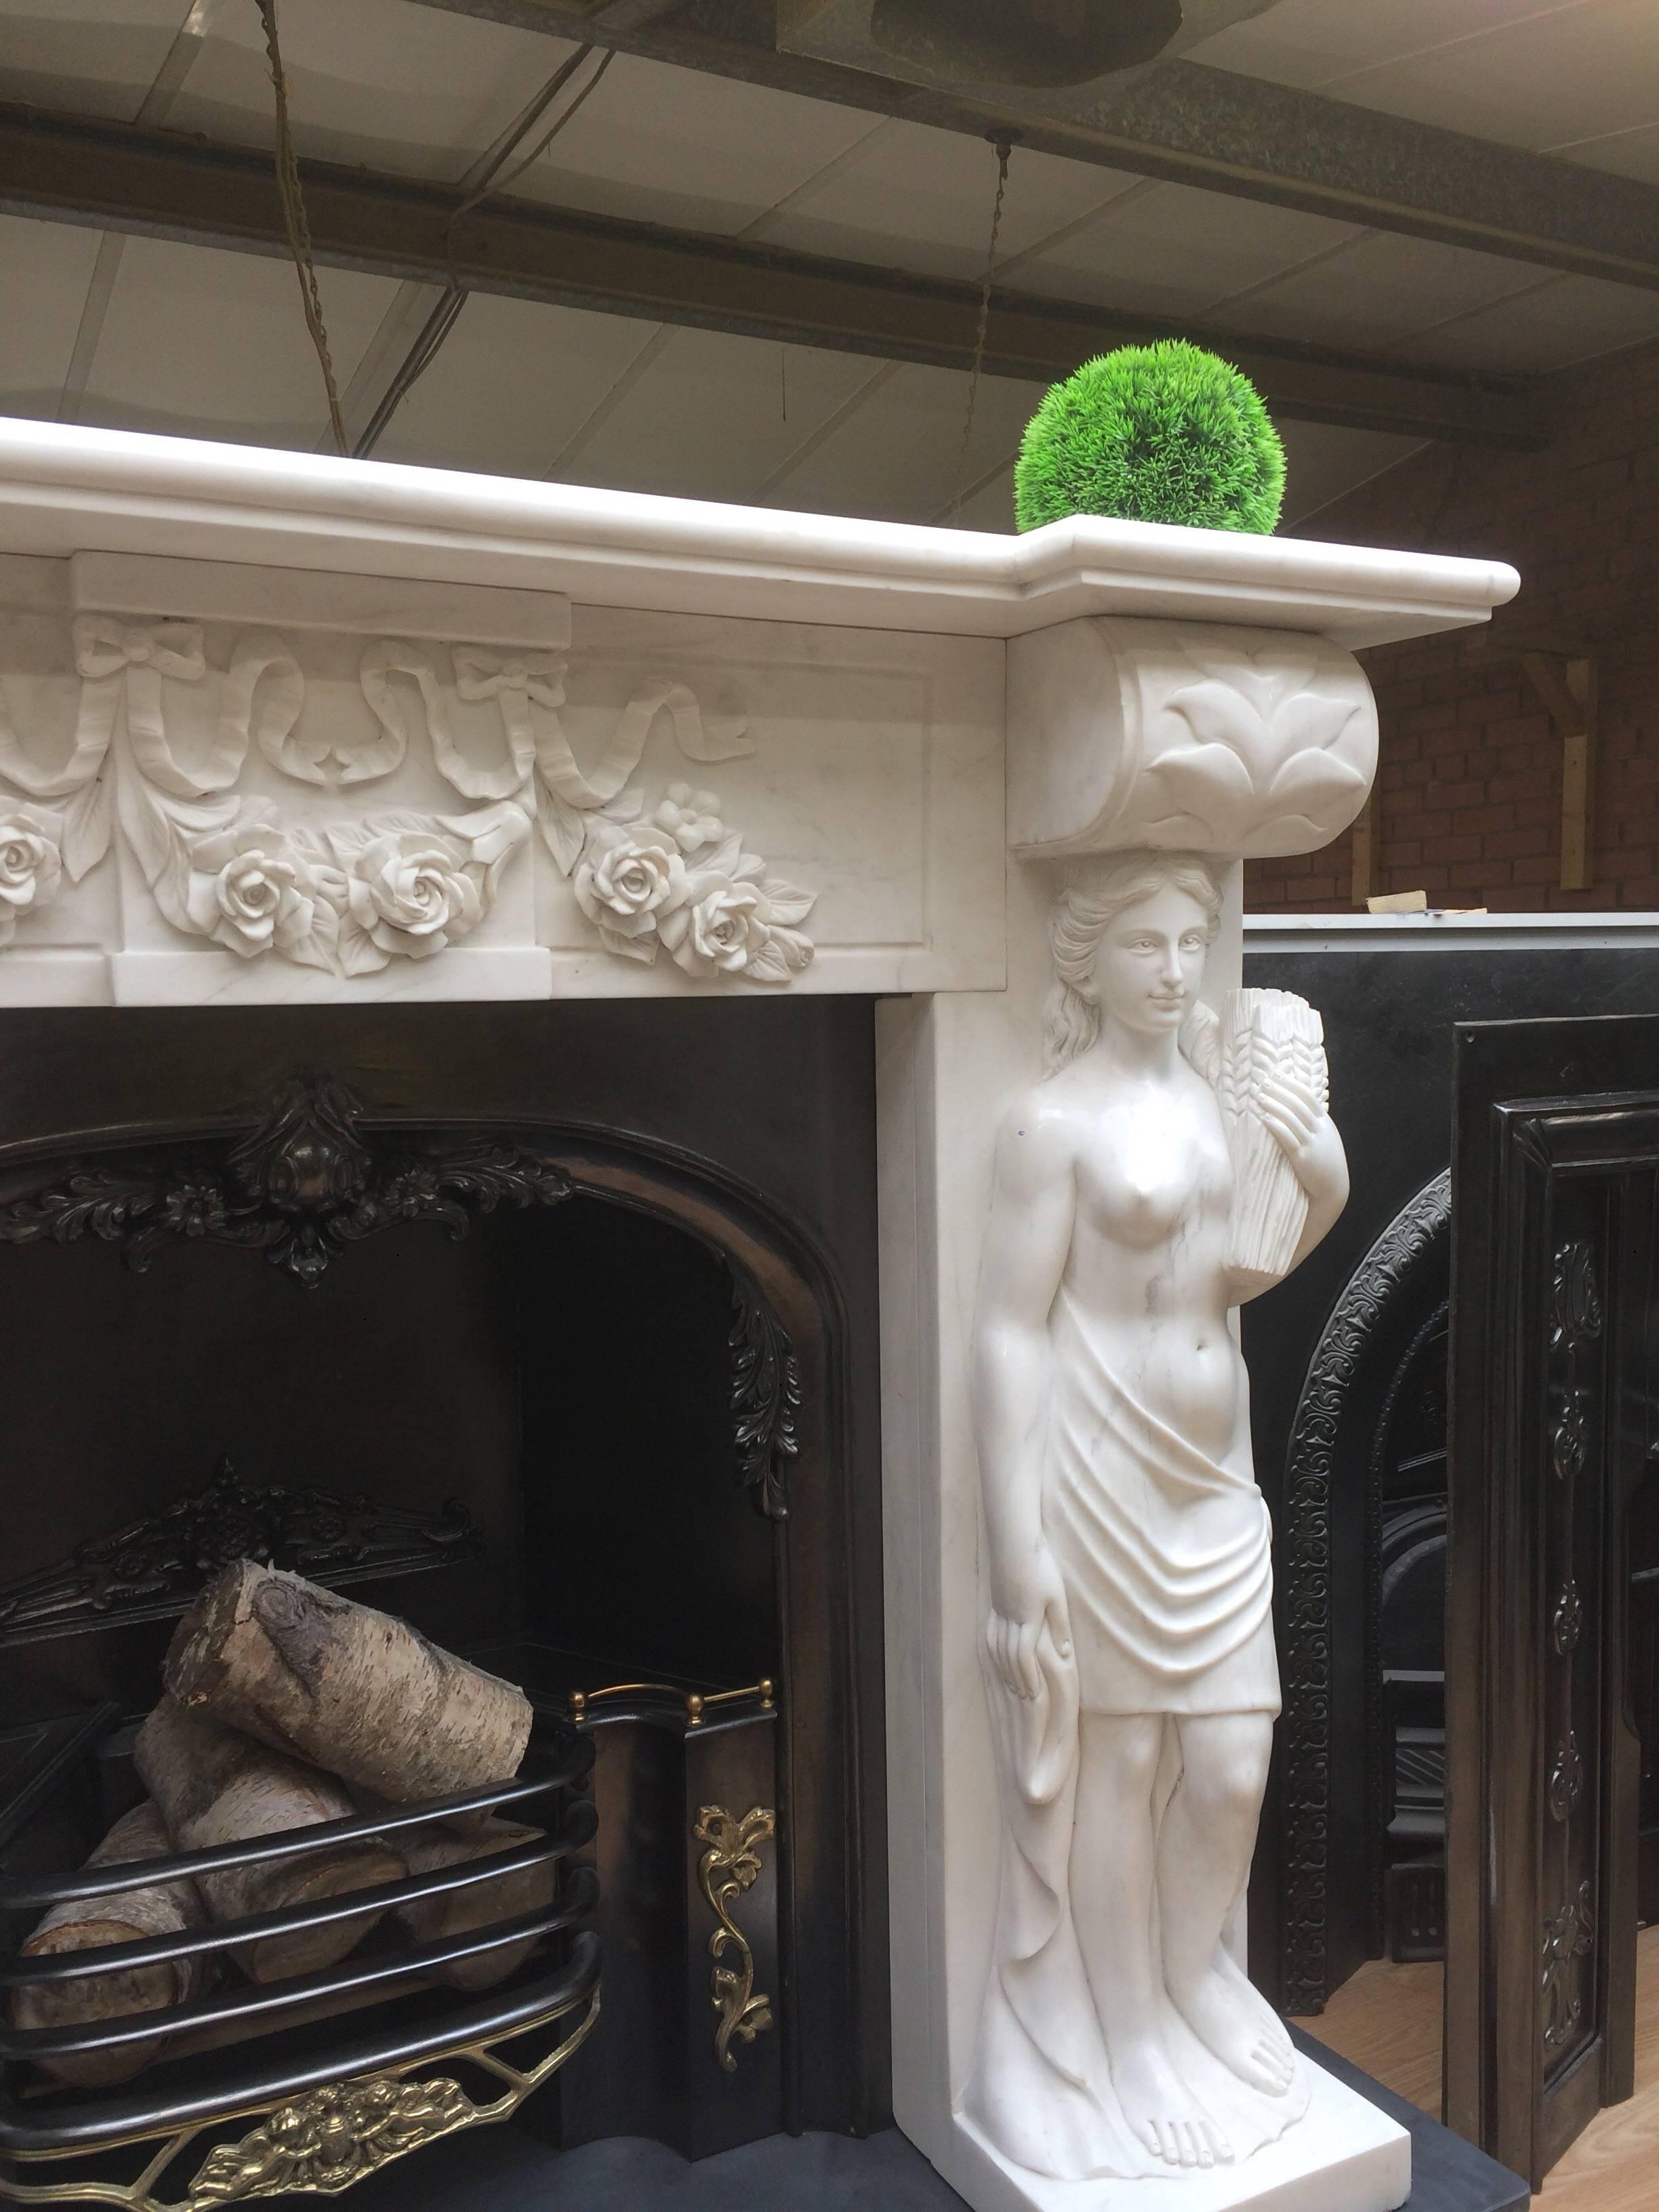 Late 20th Century Period Statuary Marble Fireplace Surround & Cast Iron Insert